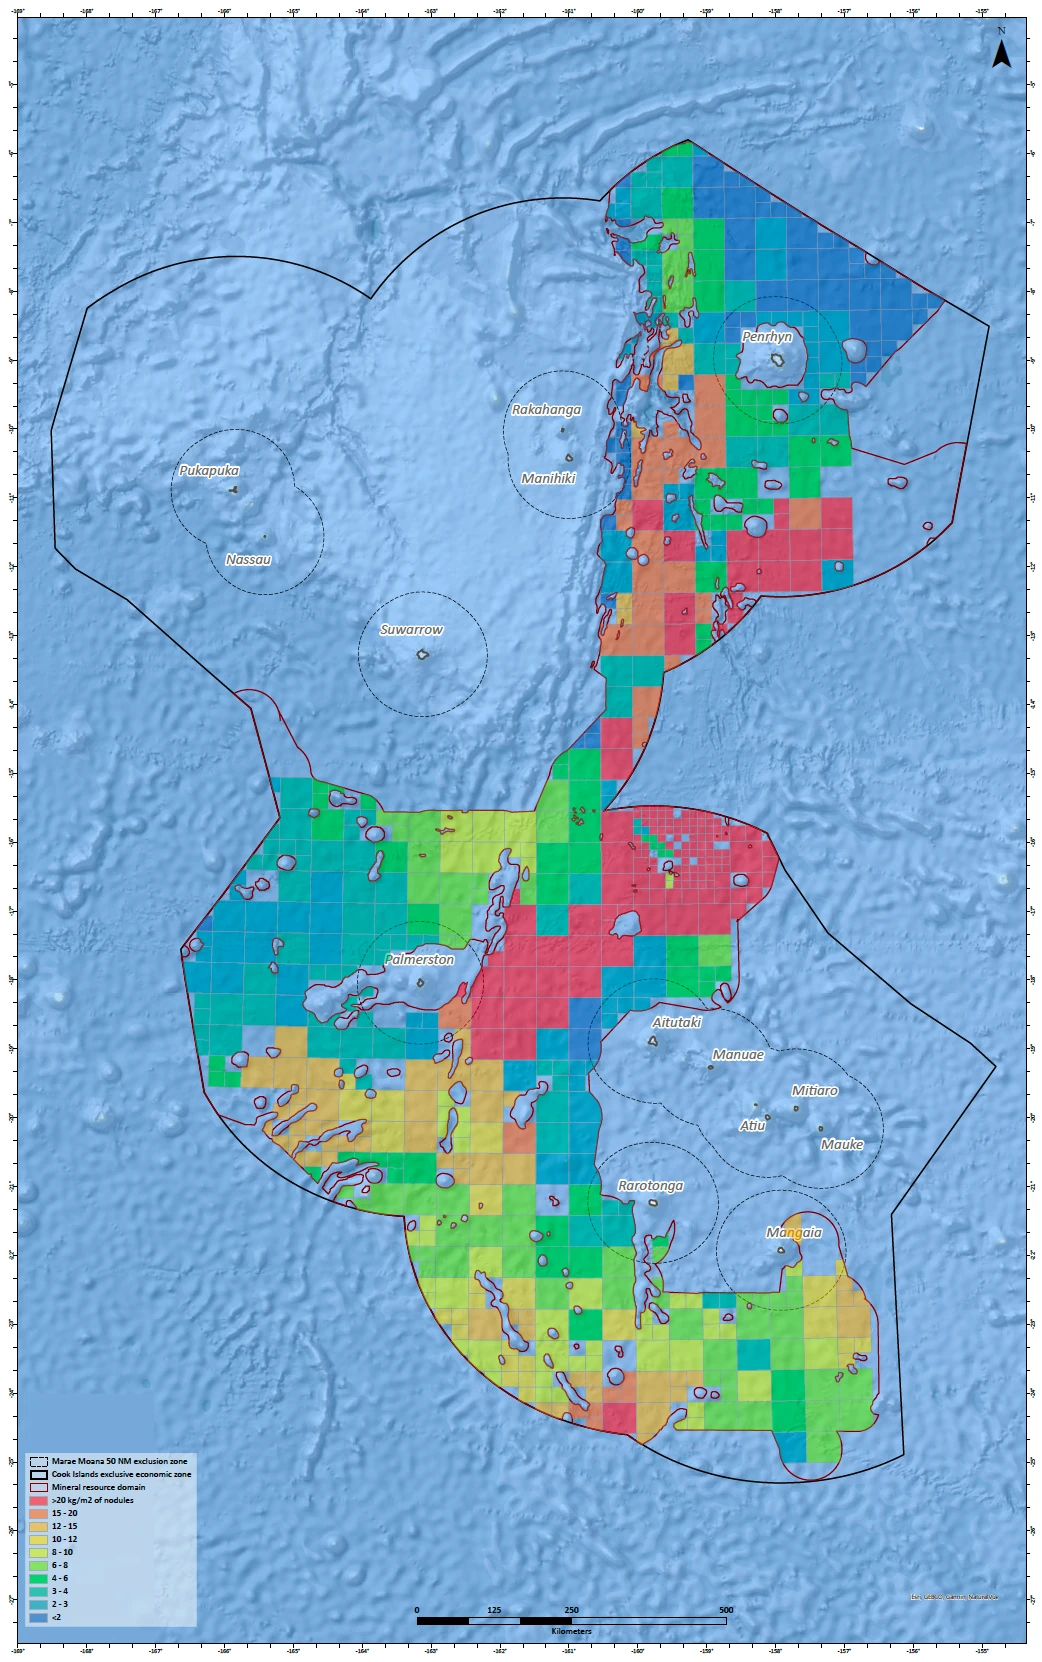 Heatmap of estimated mineral resources in the Exclusive Economic Zone of the Cook Islands